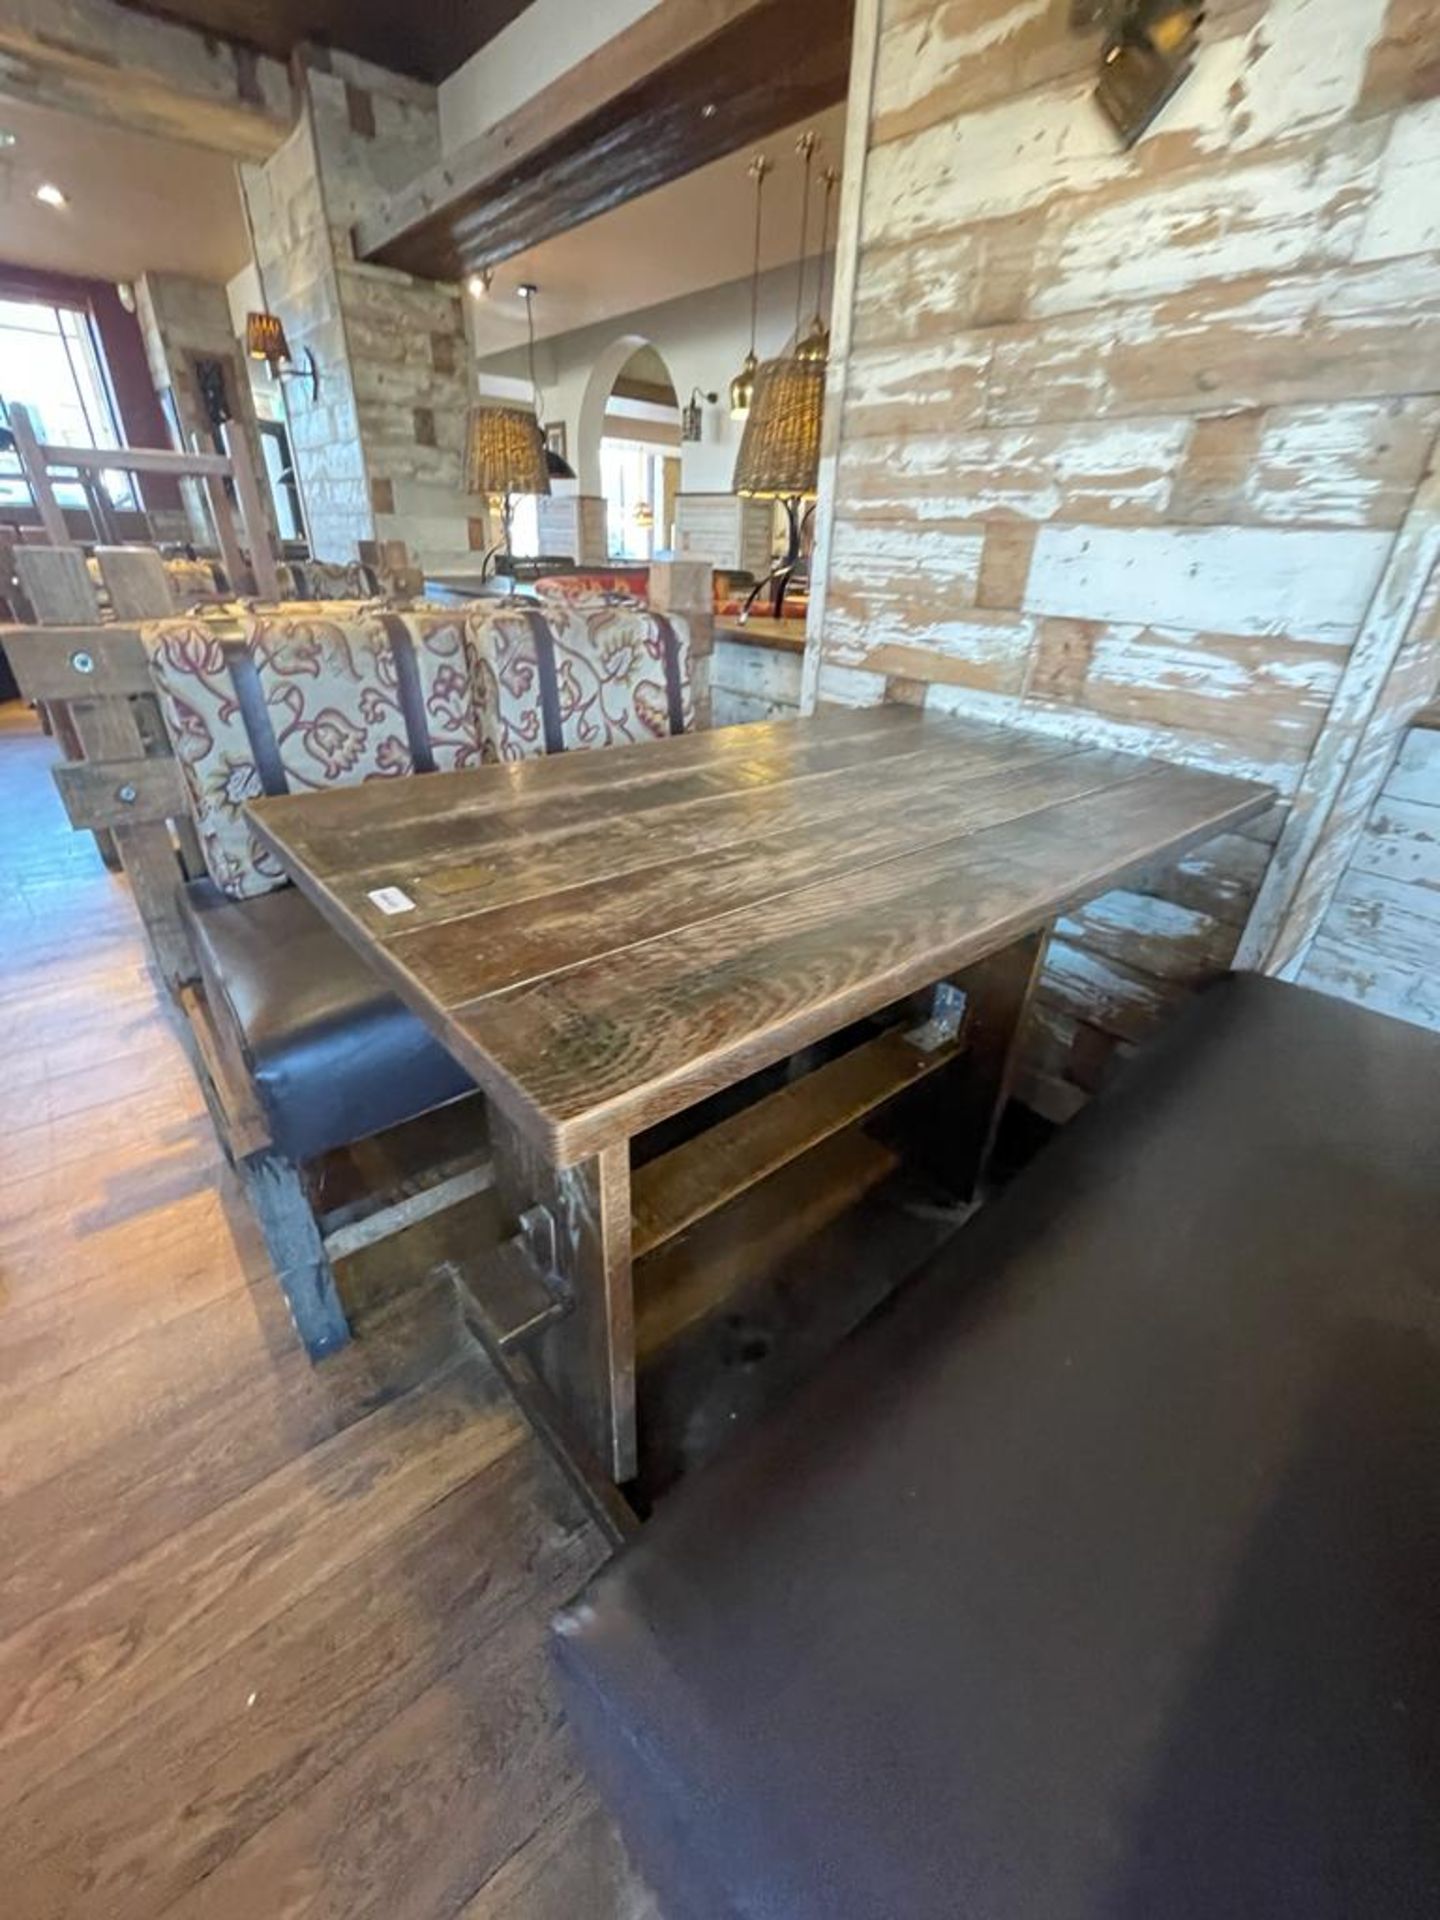 1 x Rustic Dining Table - Four Seater - PAV127 - Image 2 of 5